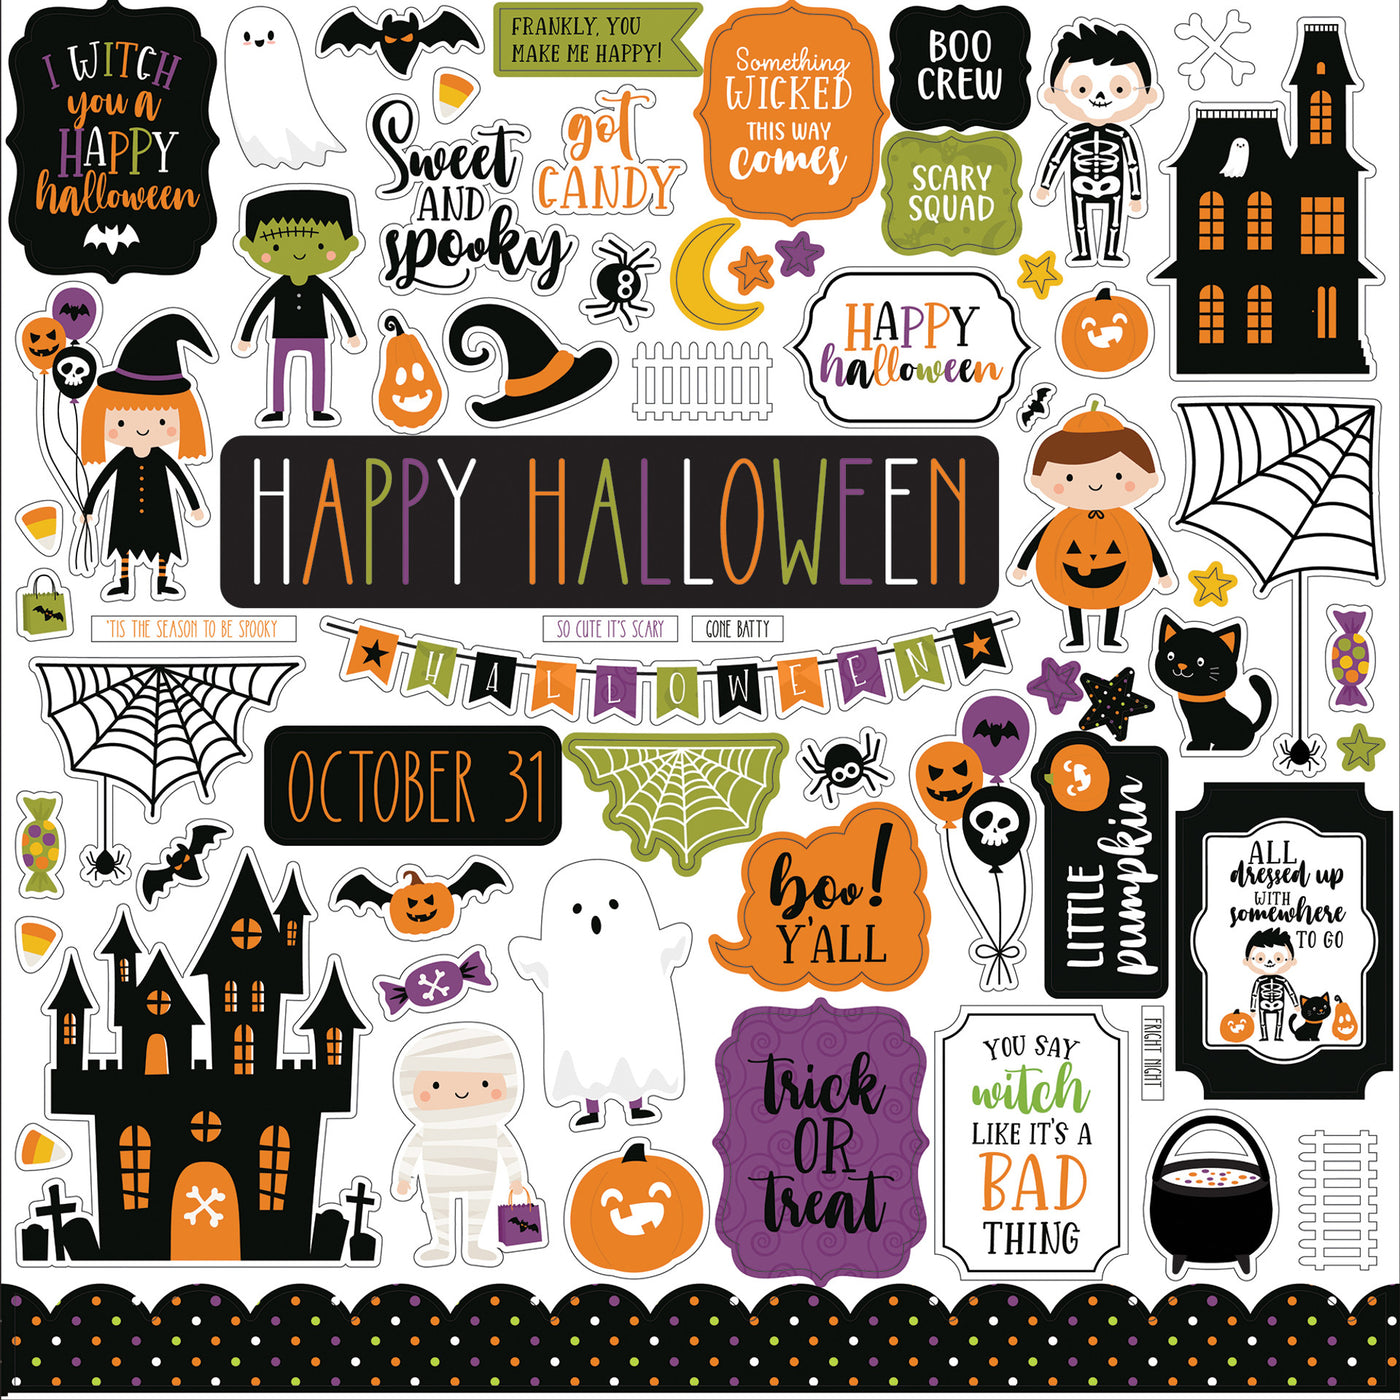 Halloween Magic Elements 12" x 12" Cardstock Stickers from the Halloween Magic Collection by Echo Park. Stickers include phrases, frames, pumpkins, ghosts, skeletons, and more!